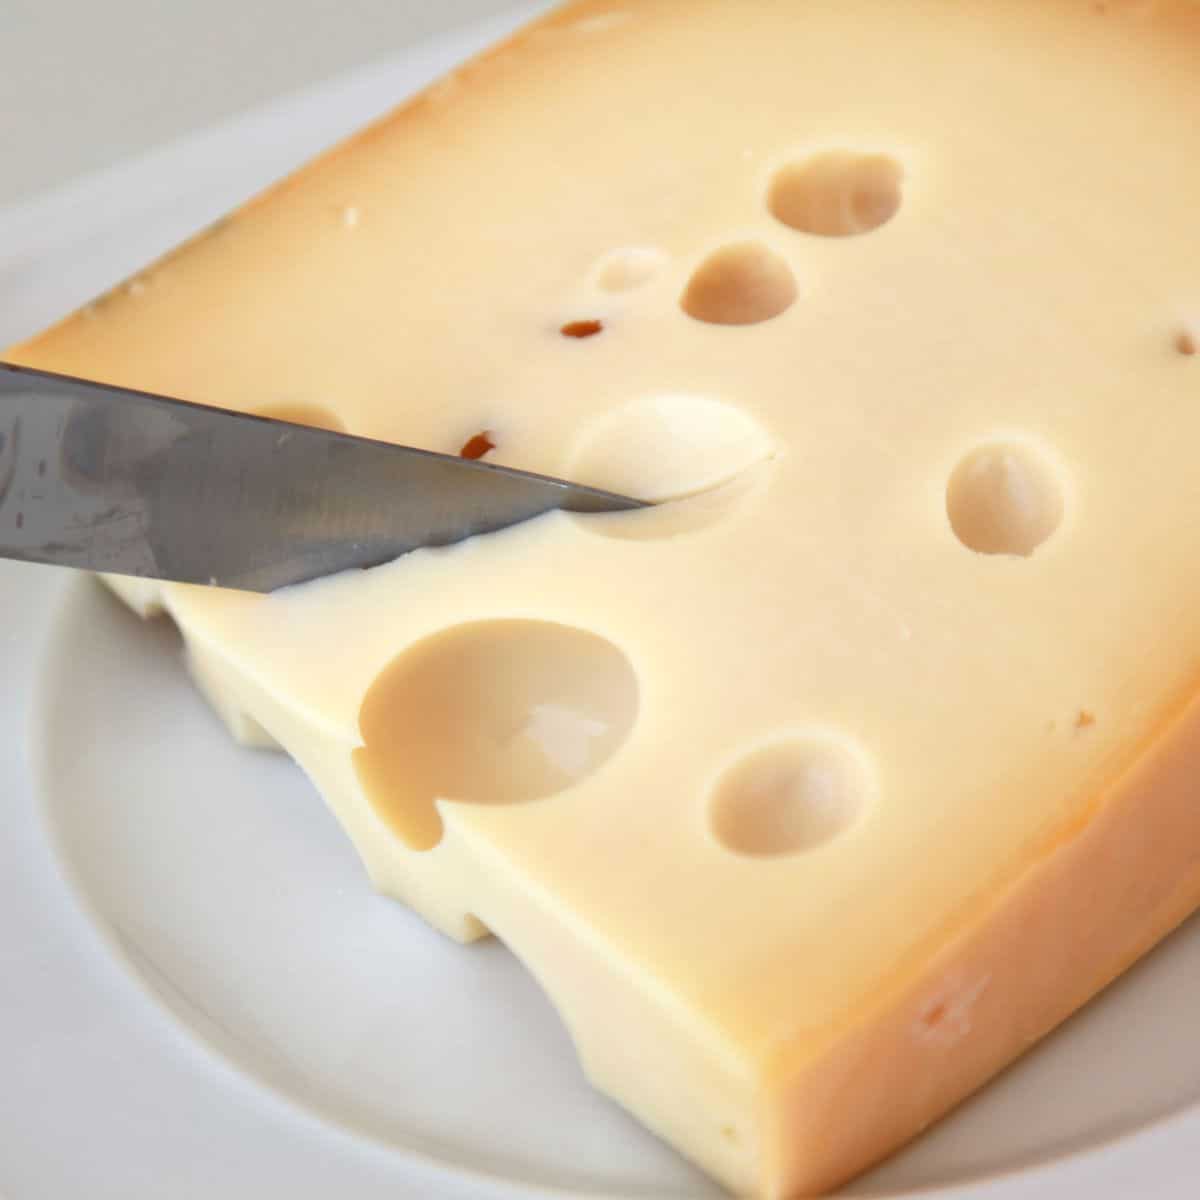 https://bakeitwithlove.com/wp-content/uploads/2023/03/swiss-cheese-substitute-sq.jpg